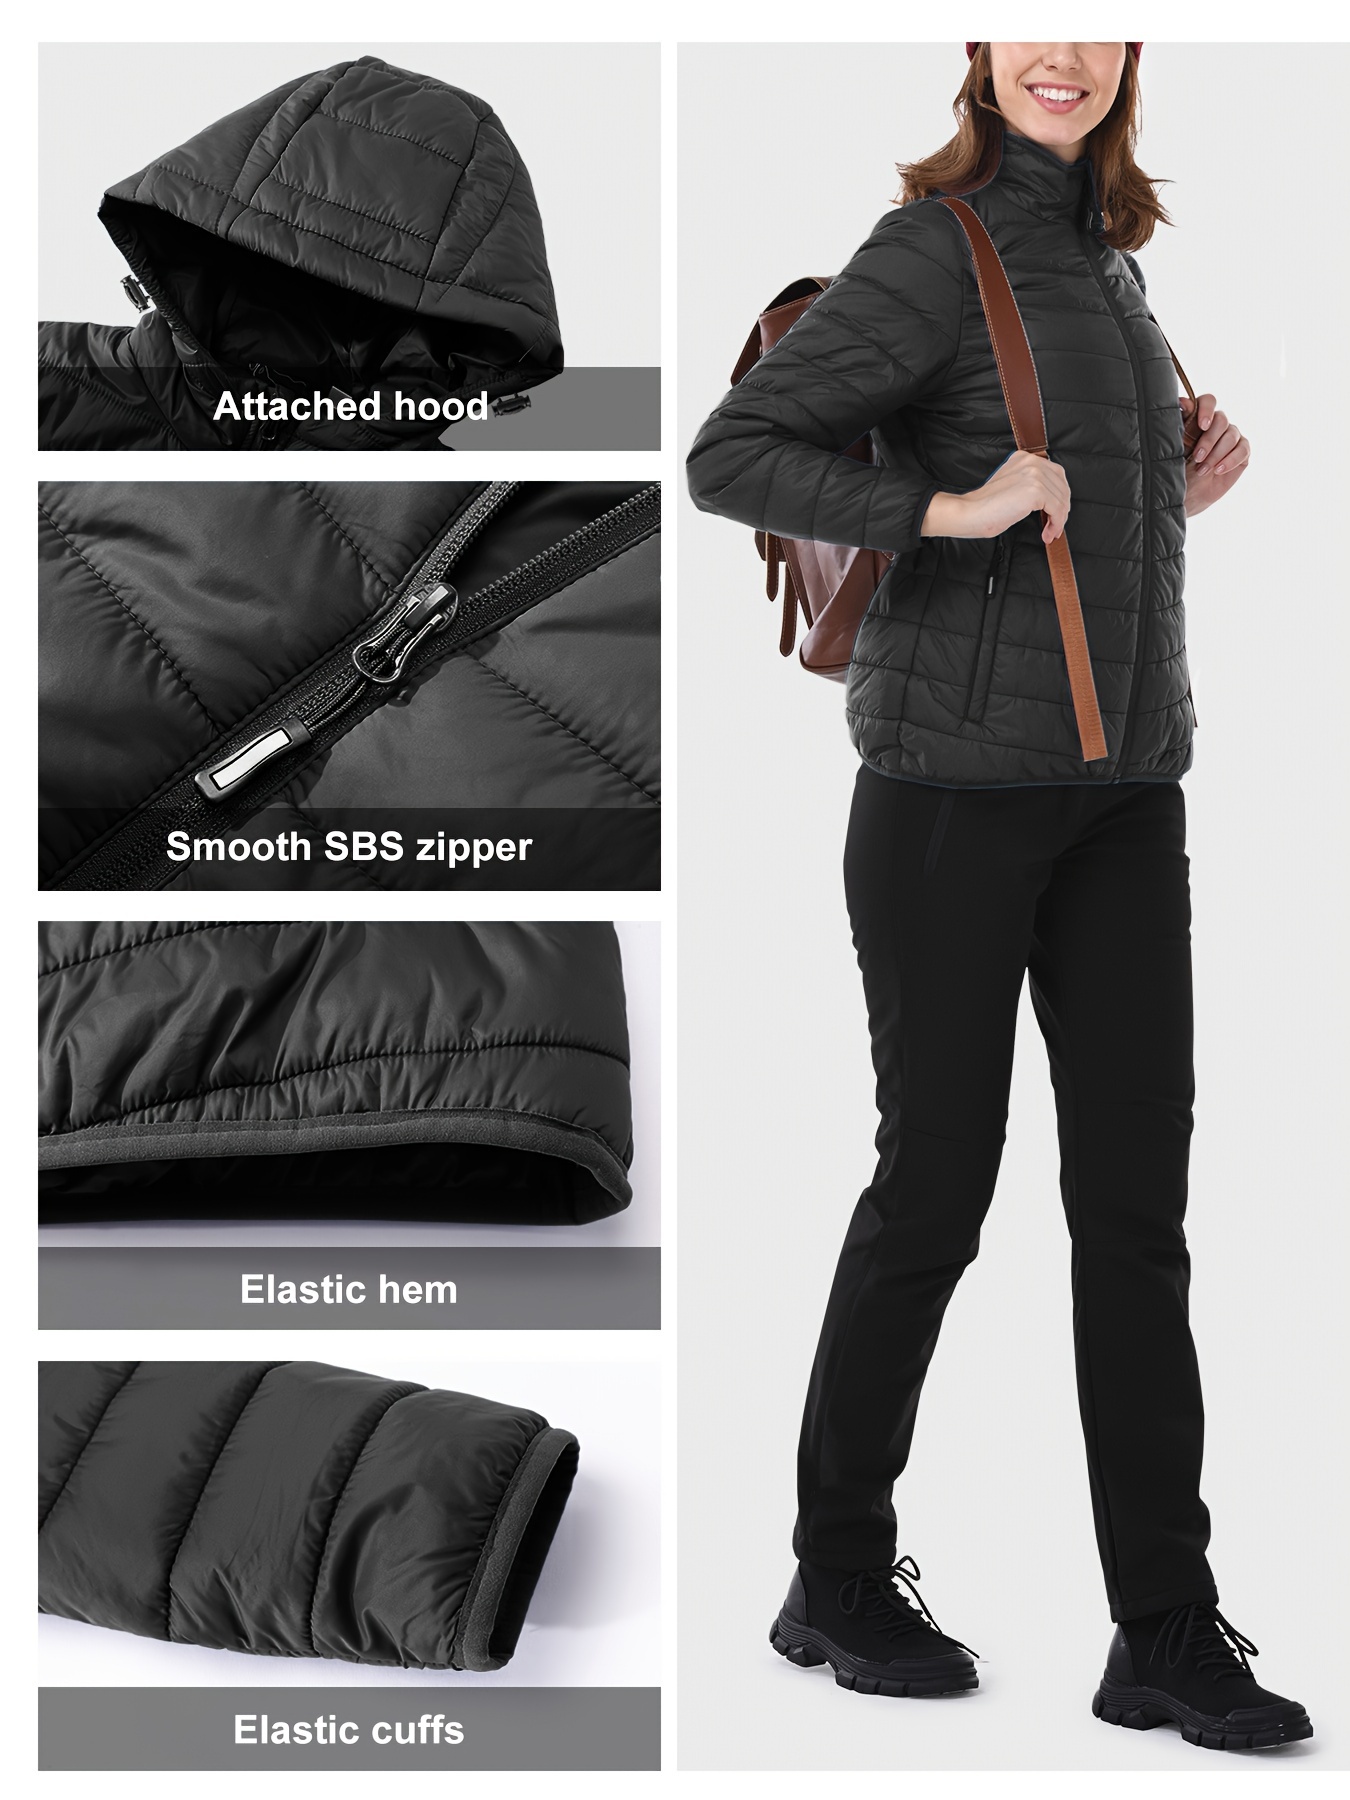 Black Quilted Puffer Zip Sac